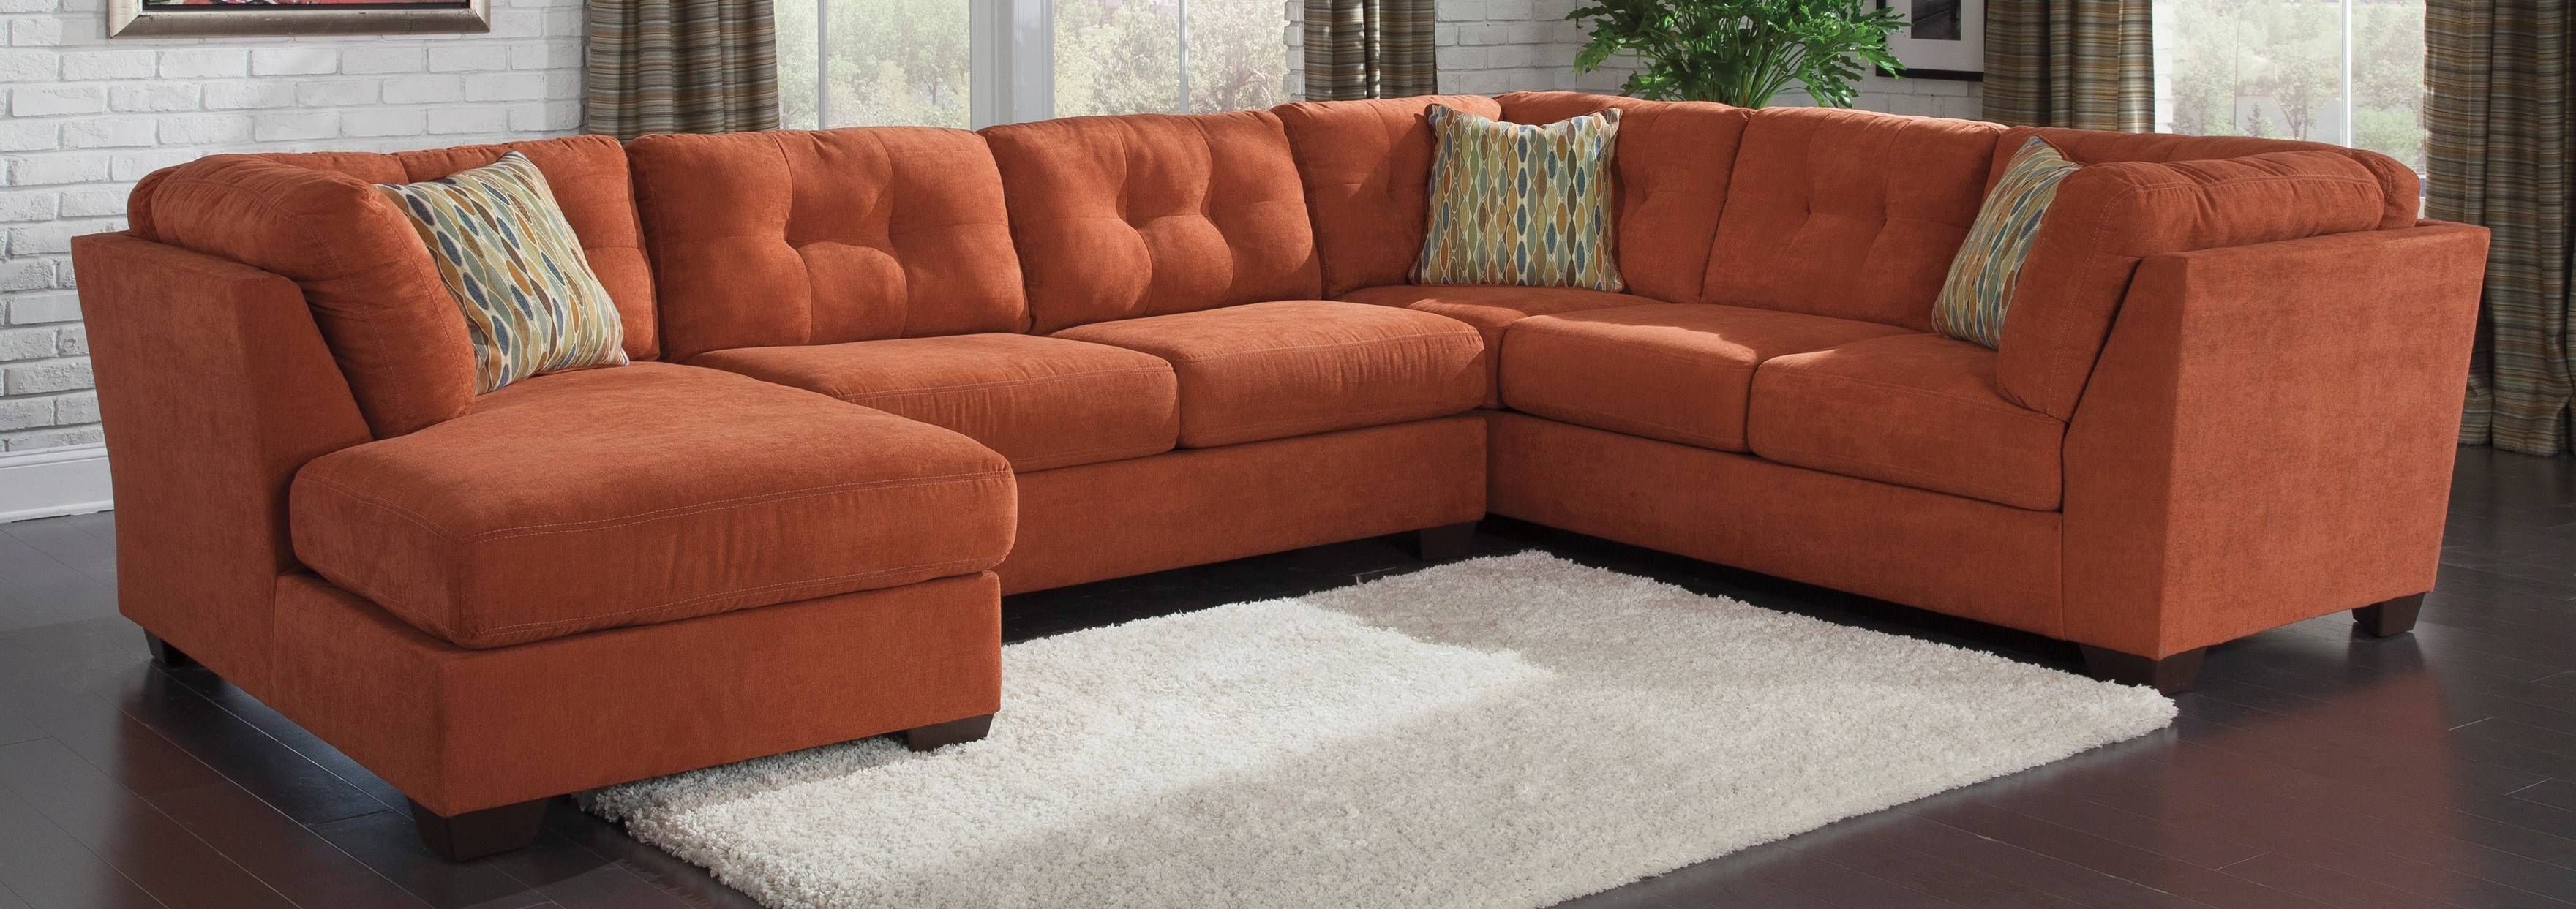 Ashley Furniture Delta City Rust Laf Corner Chaise Sectional Inside Burnt Orange Sectional Sofas (Photo 15 of 15)